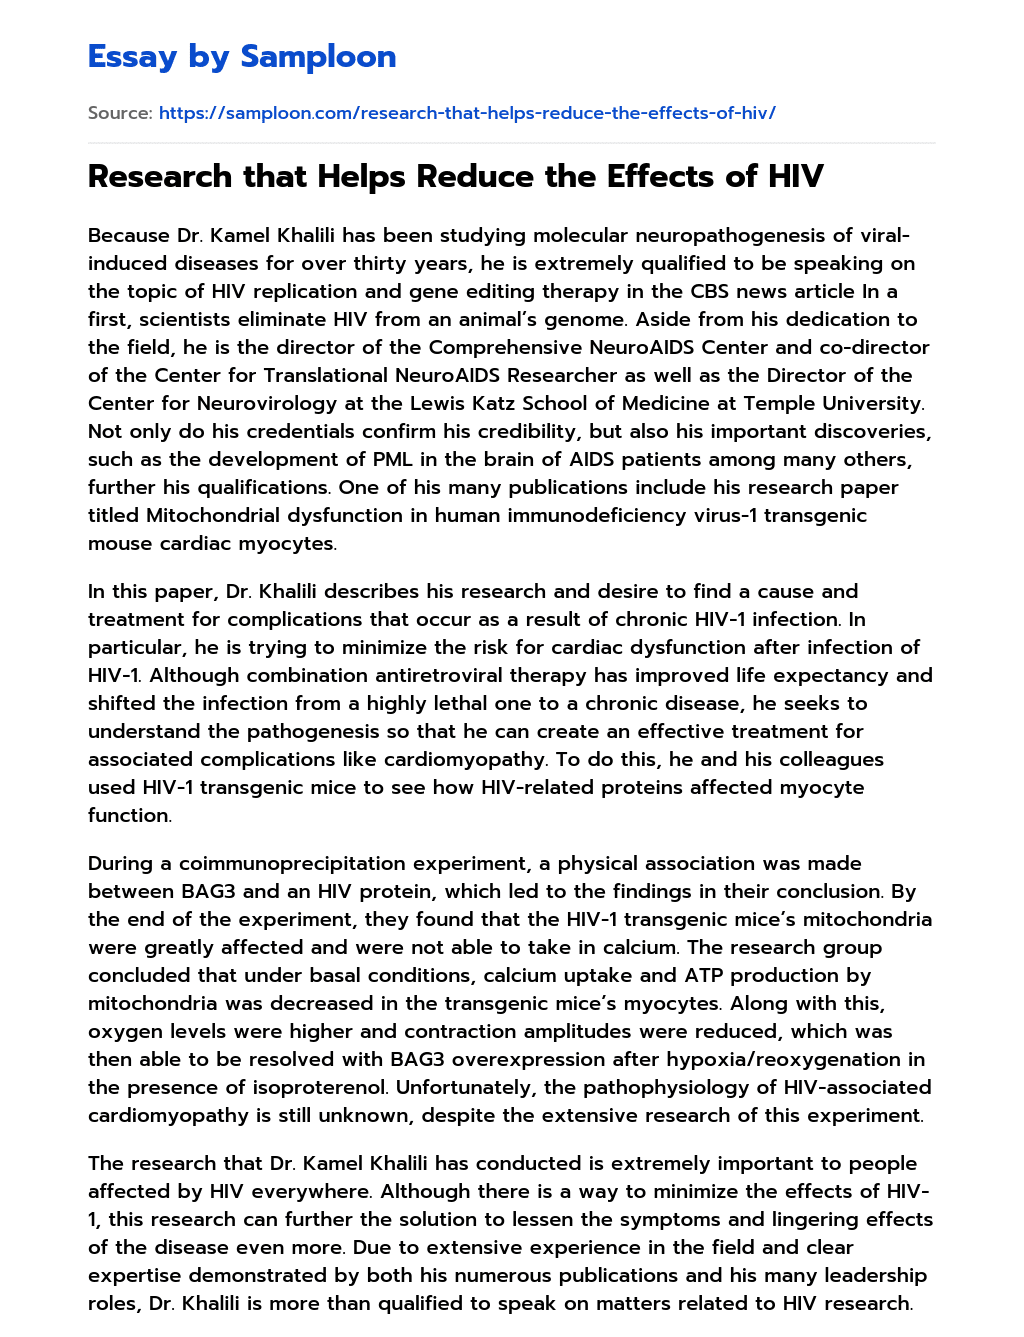 Research that Helps Reduce the Effects of HIV essay